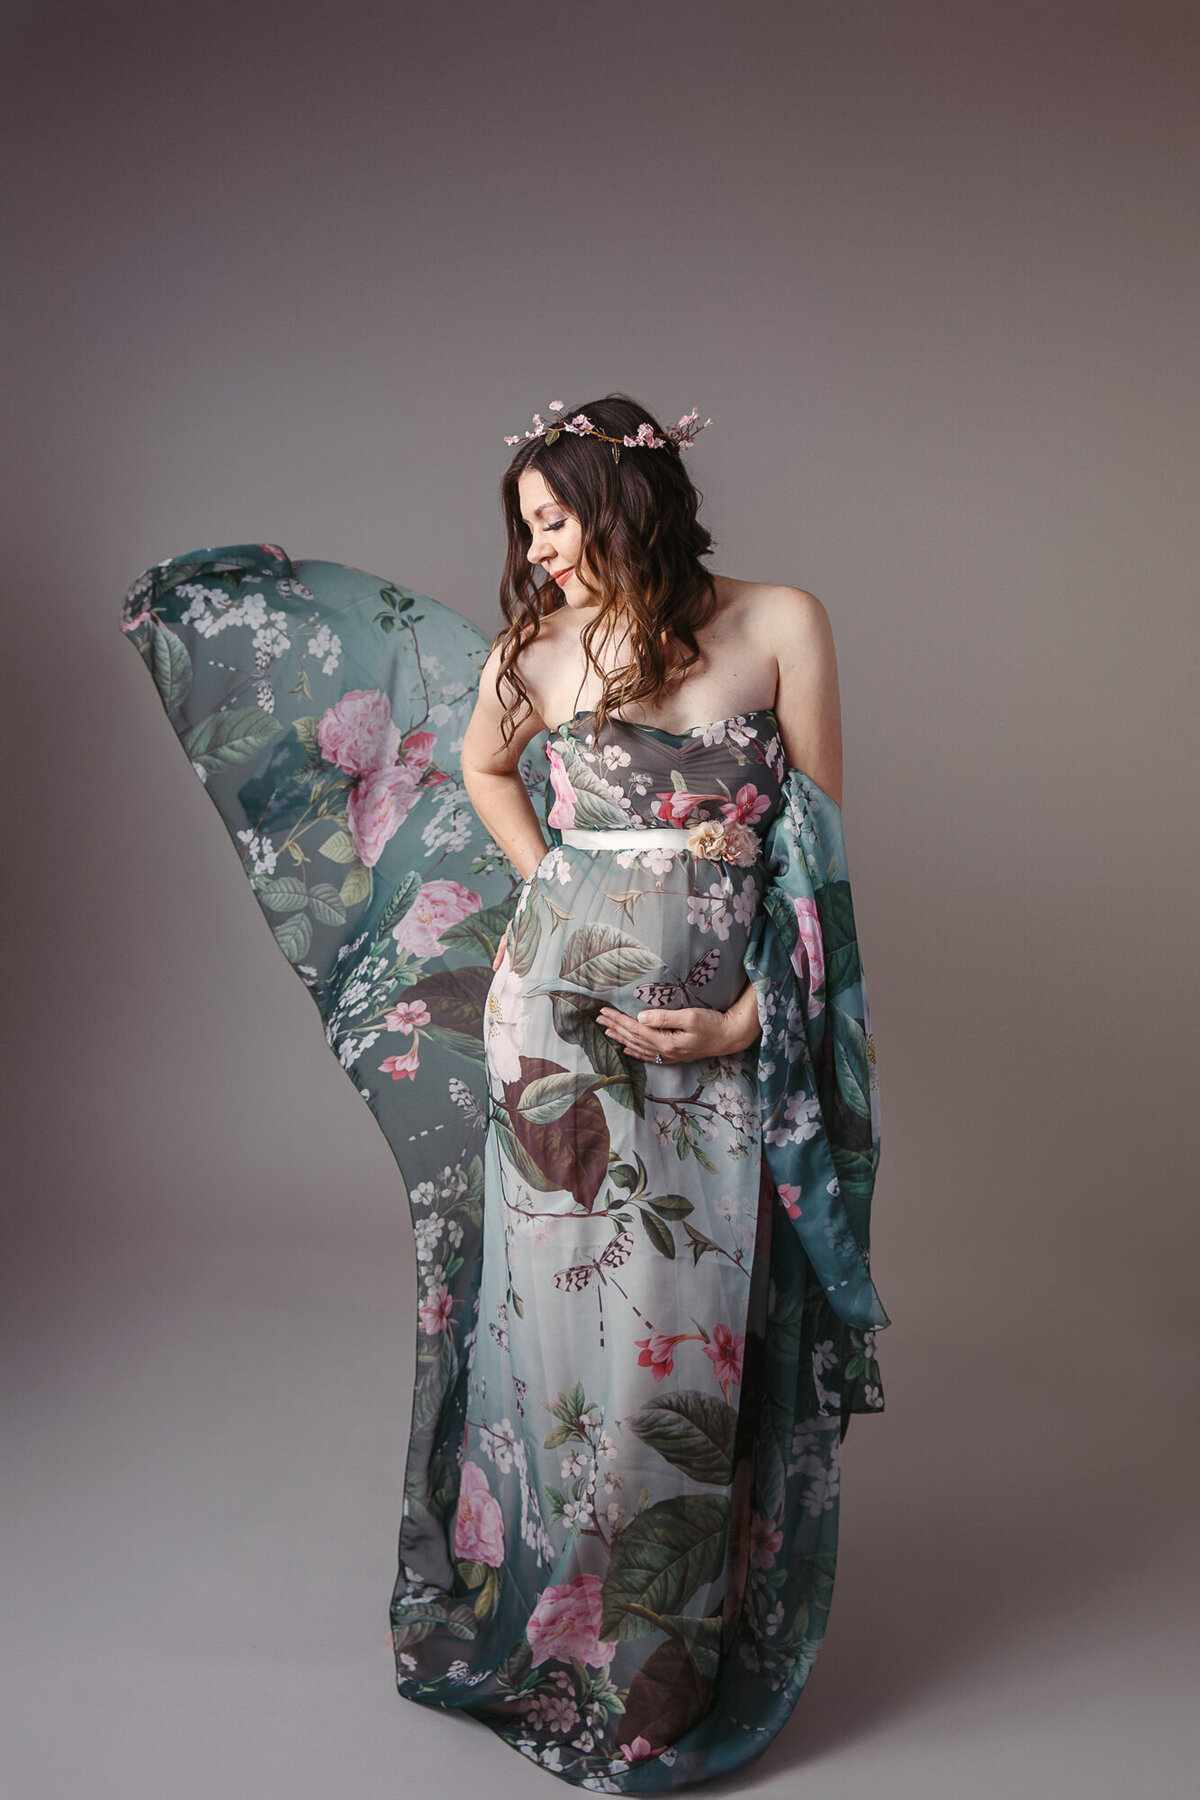 Beautiful woman holding her pregnant belly wearing a green floral gown that is blowing in the air behind her